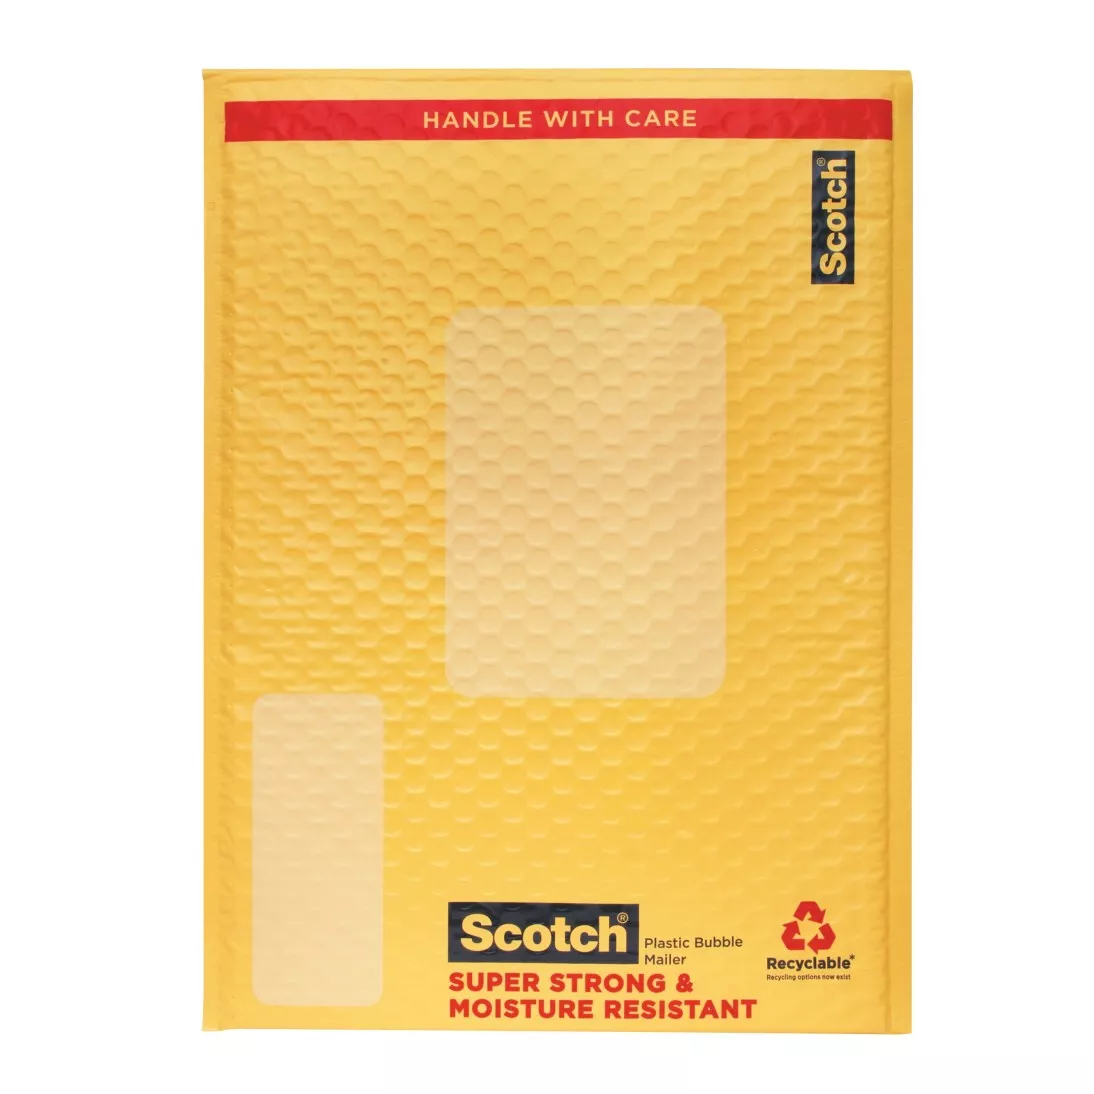 Scotch™ Poly Bubble Mailer 4-Pack, 8915-4, 10.5 in x 15.25 in Size #5,
12 Packs/Cs